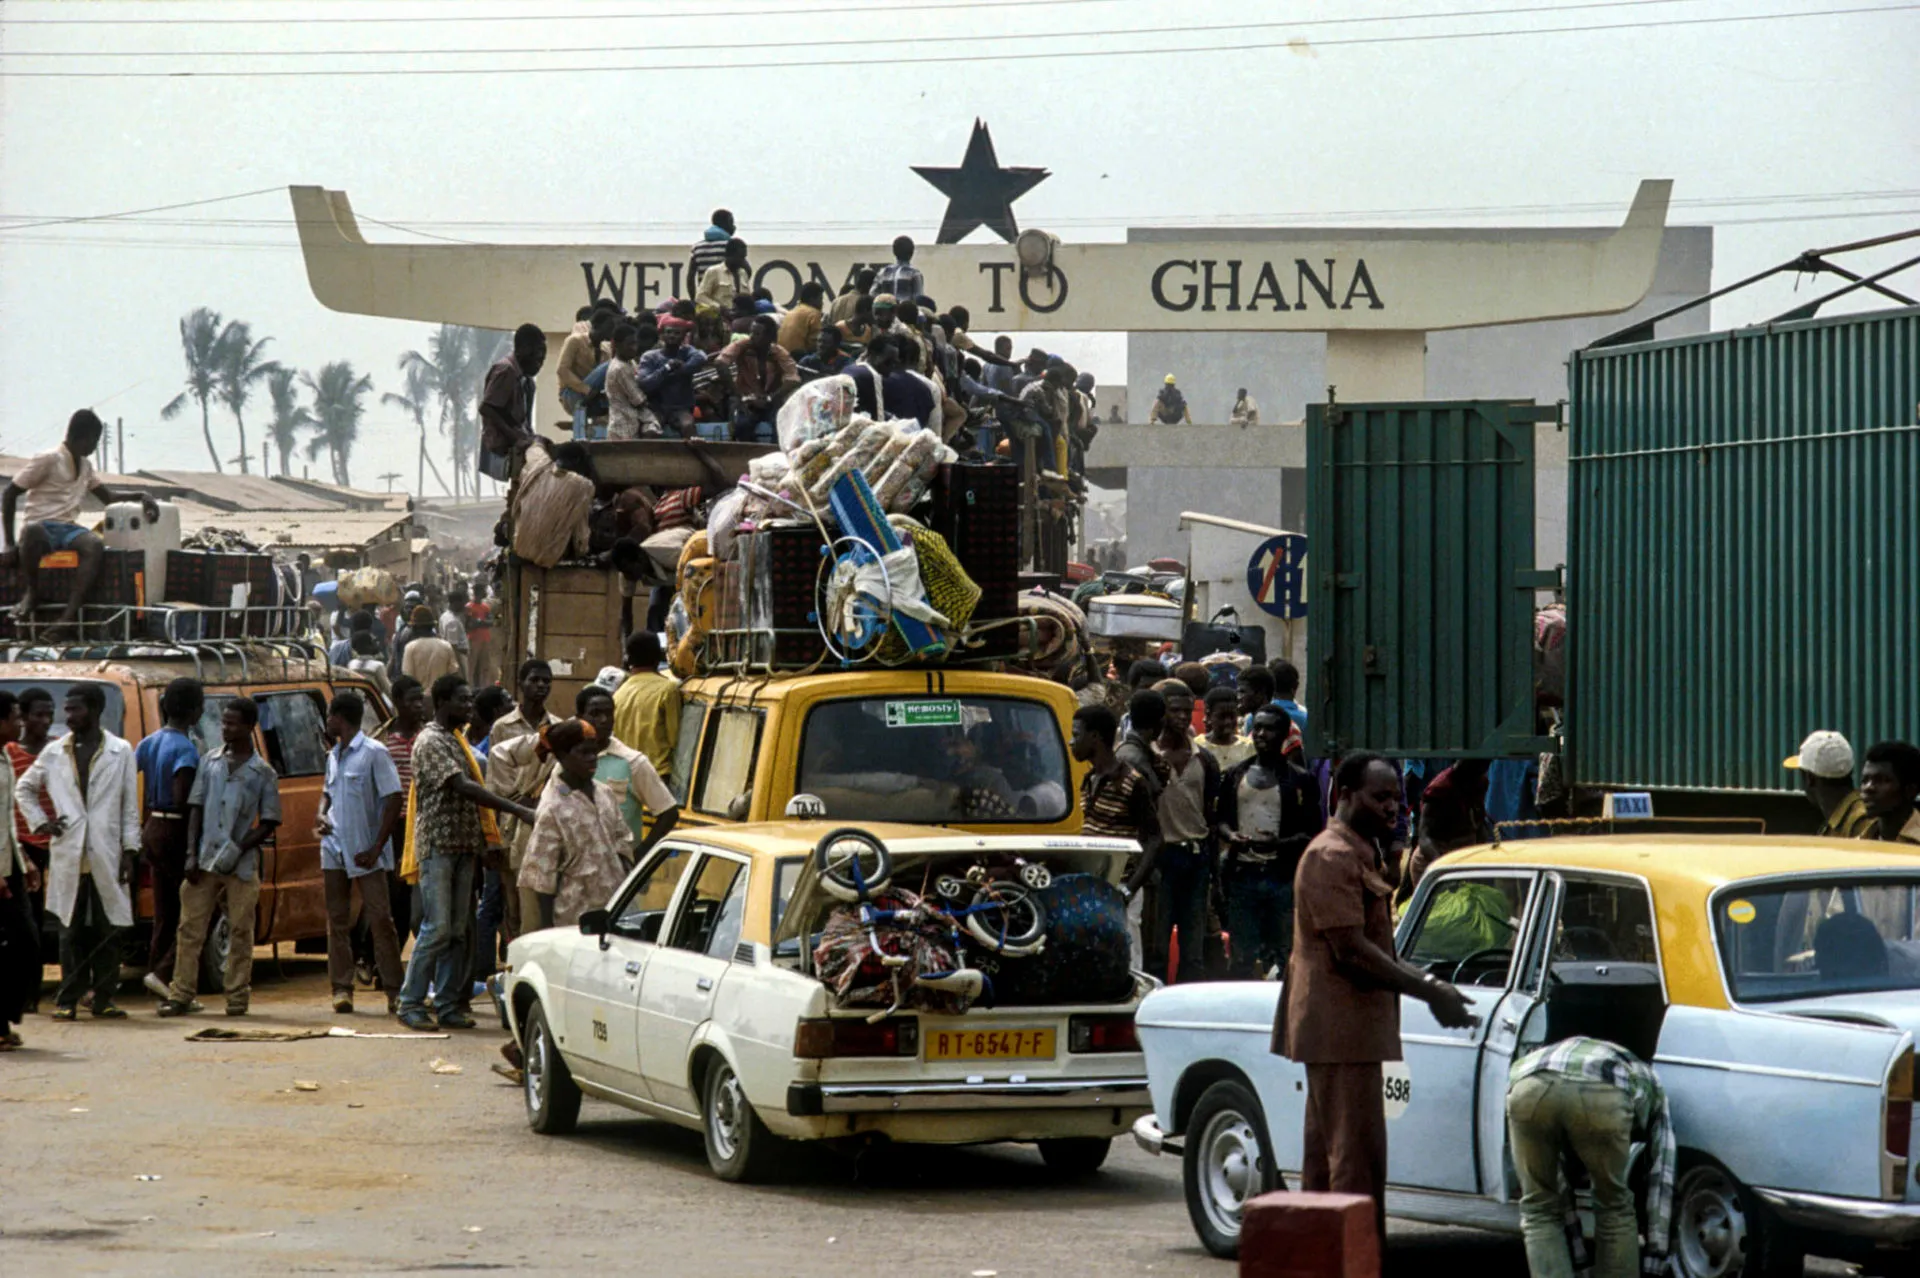 Ghanaians finally arriving their country after the mass exodus from Nigeria